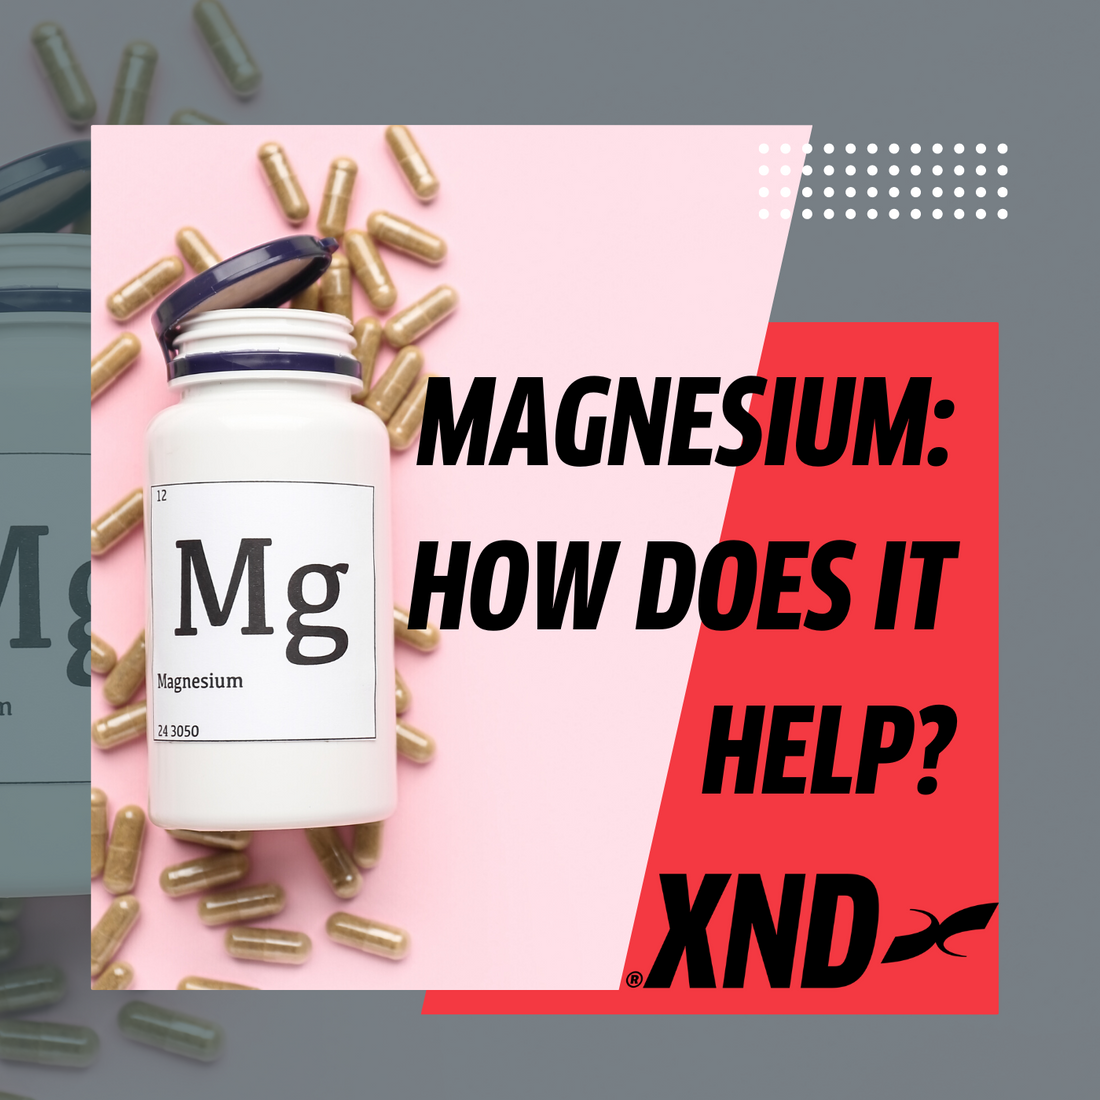 Magnesium - how does it help?